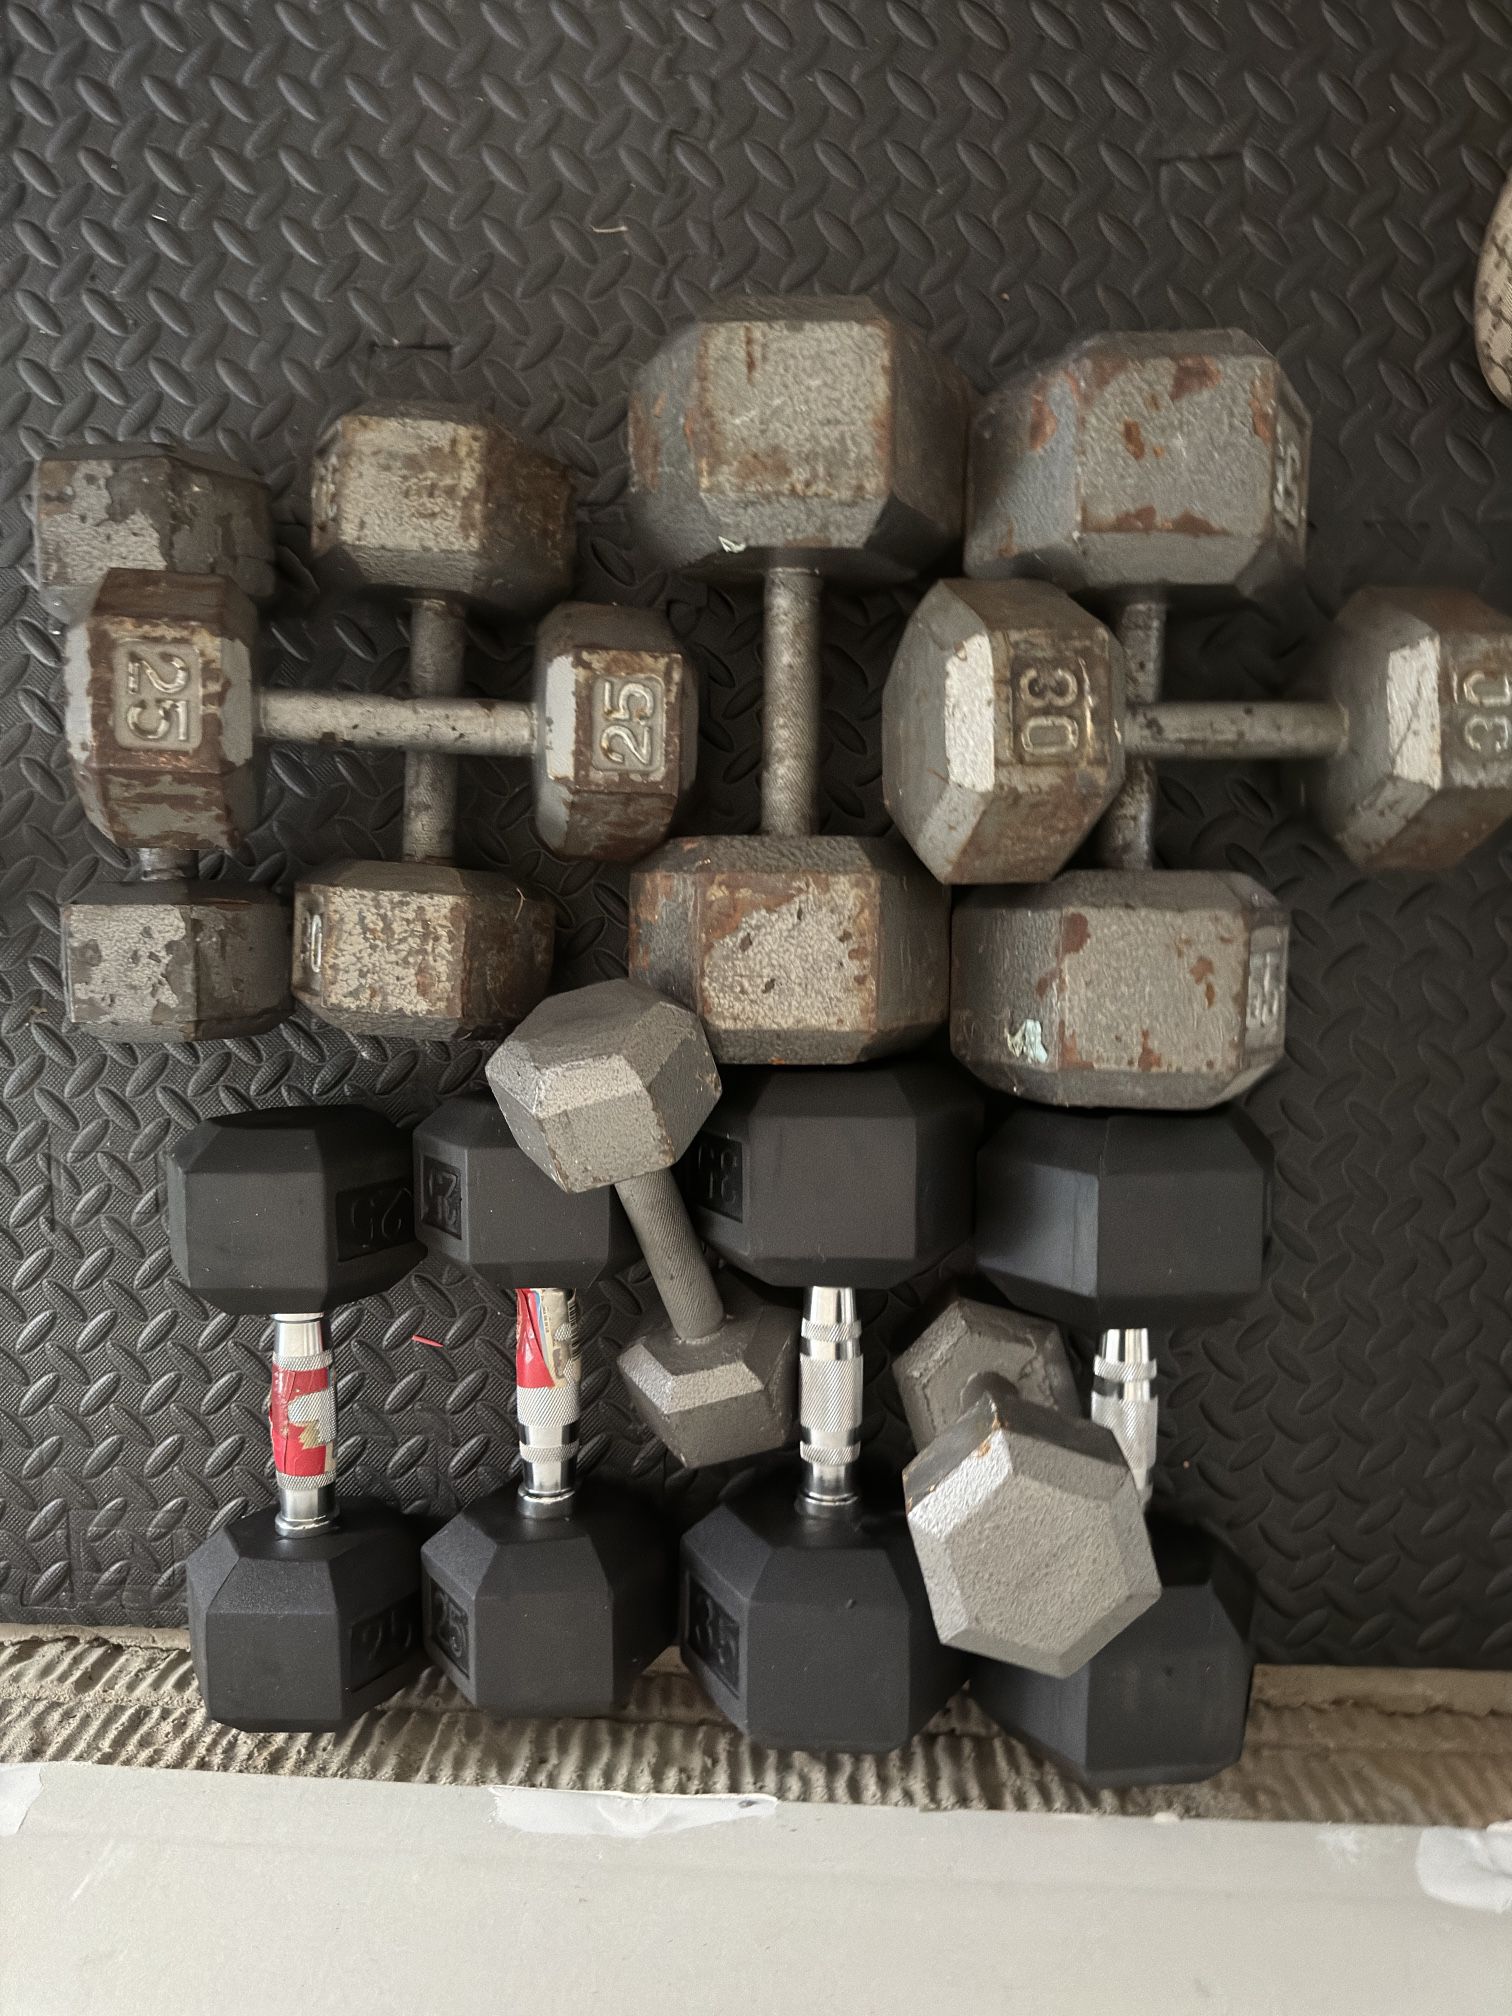 Dumb Bells From 15 To 45 Two Peices Each 